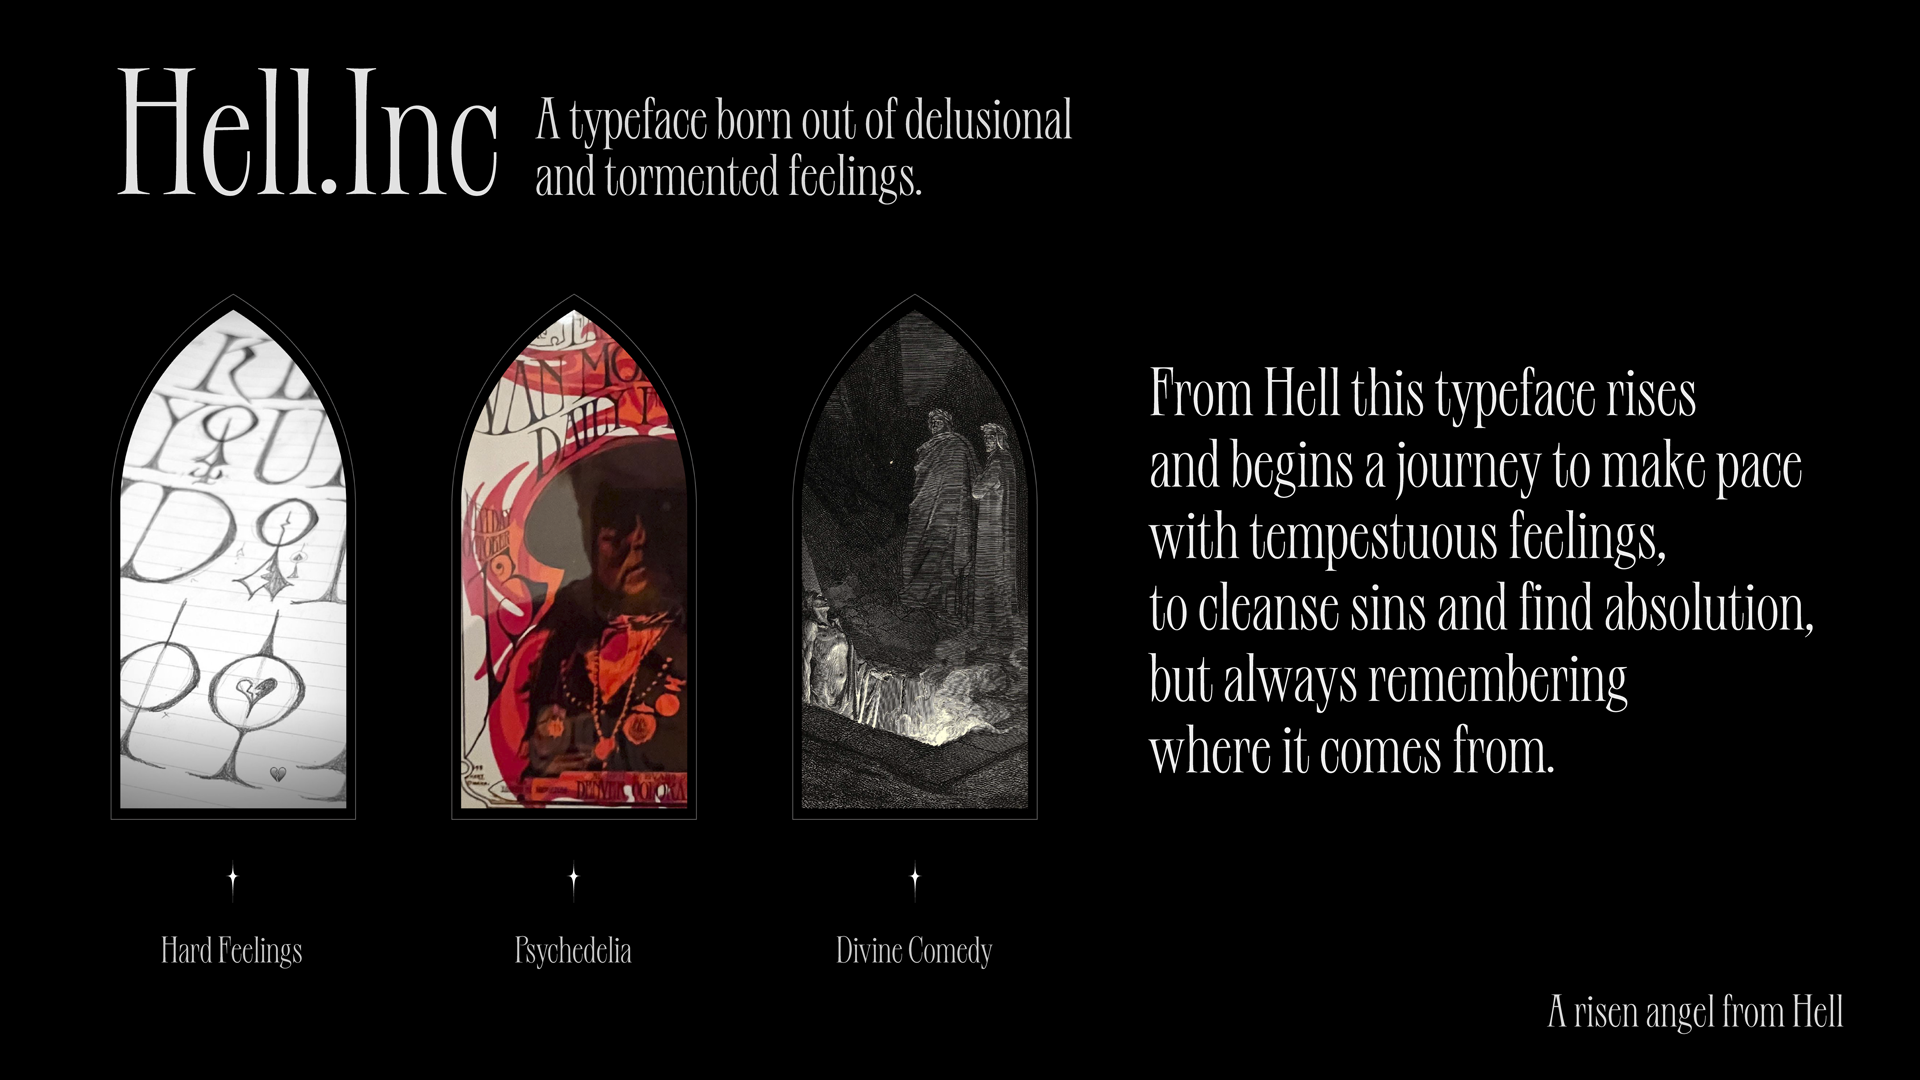 Description of the project. Hell.Inc A typeface born out of delusional  and tormented feelings. From Hell this typeface rises and begins a journey to make pace with tempestuous feelings, to cleanse sins and find absolution, but always remembering  where it comes from.